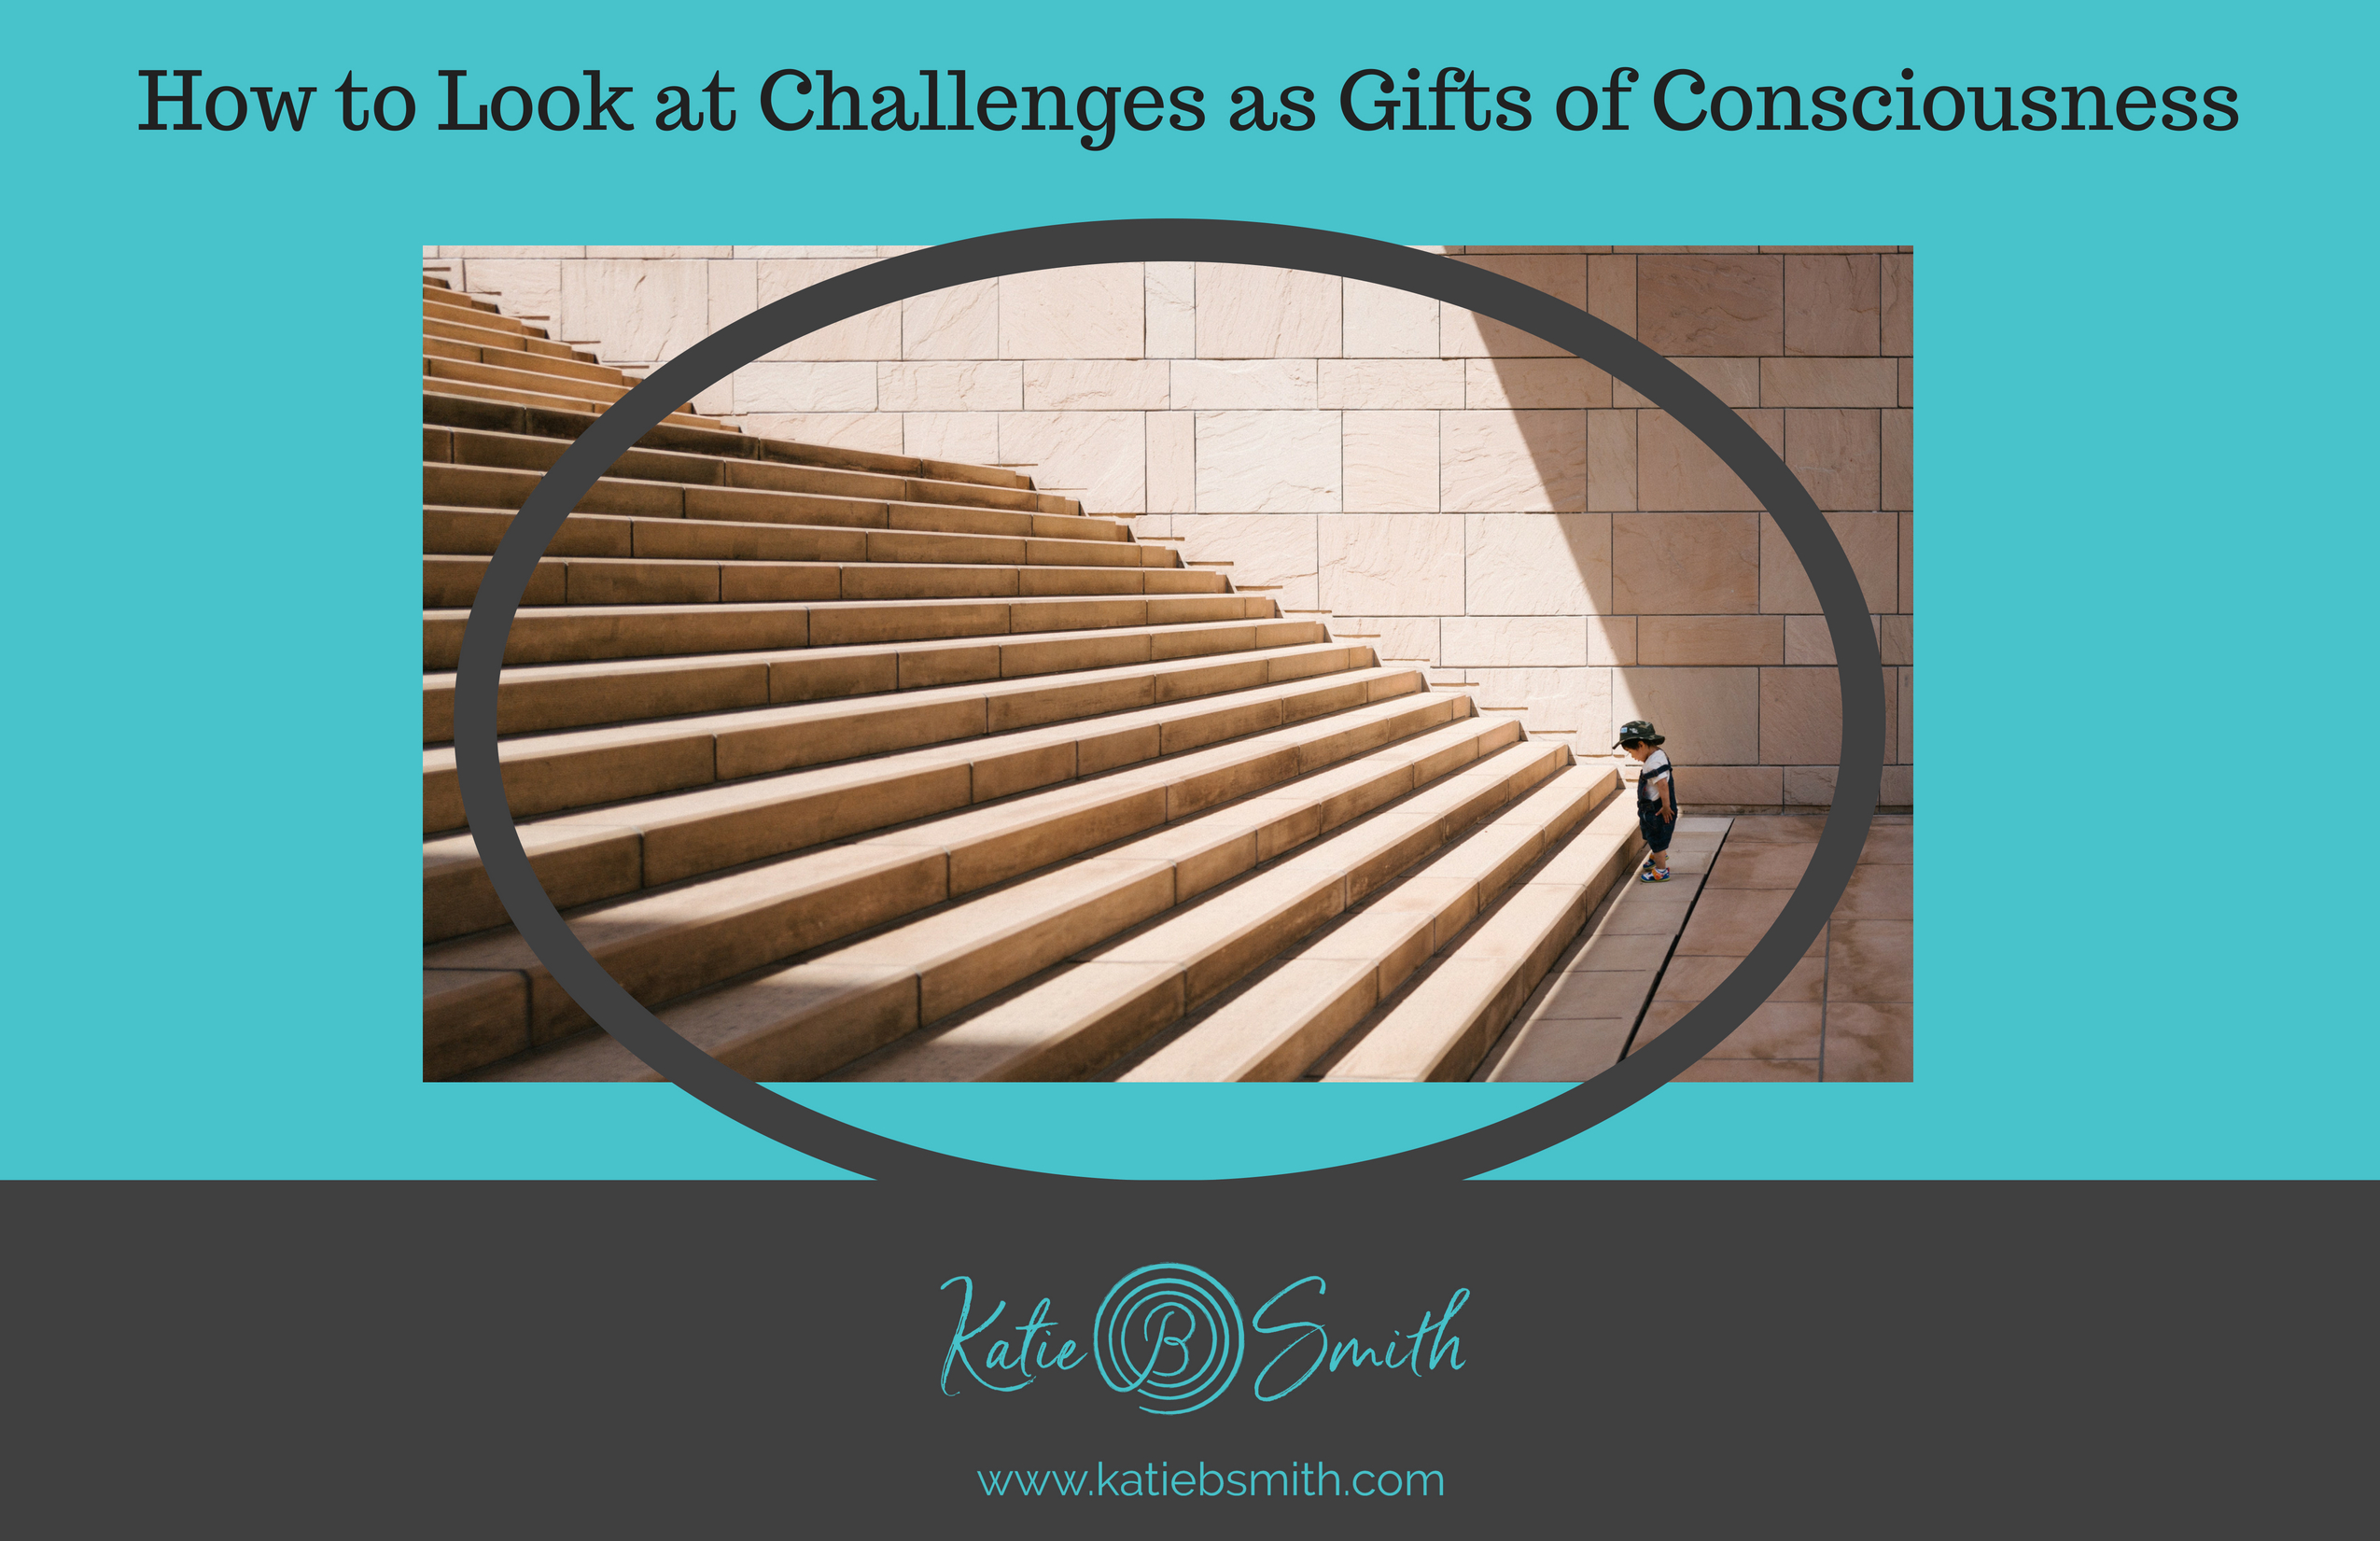 How to Look at Challenges as Gifts of Consciousness